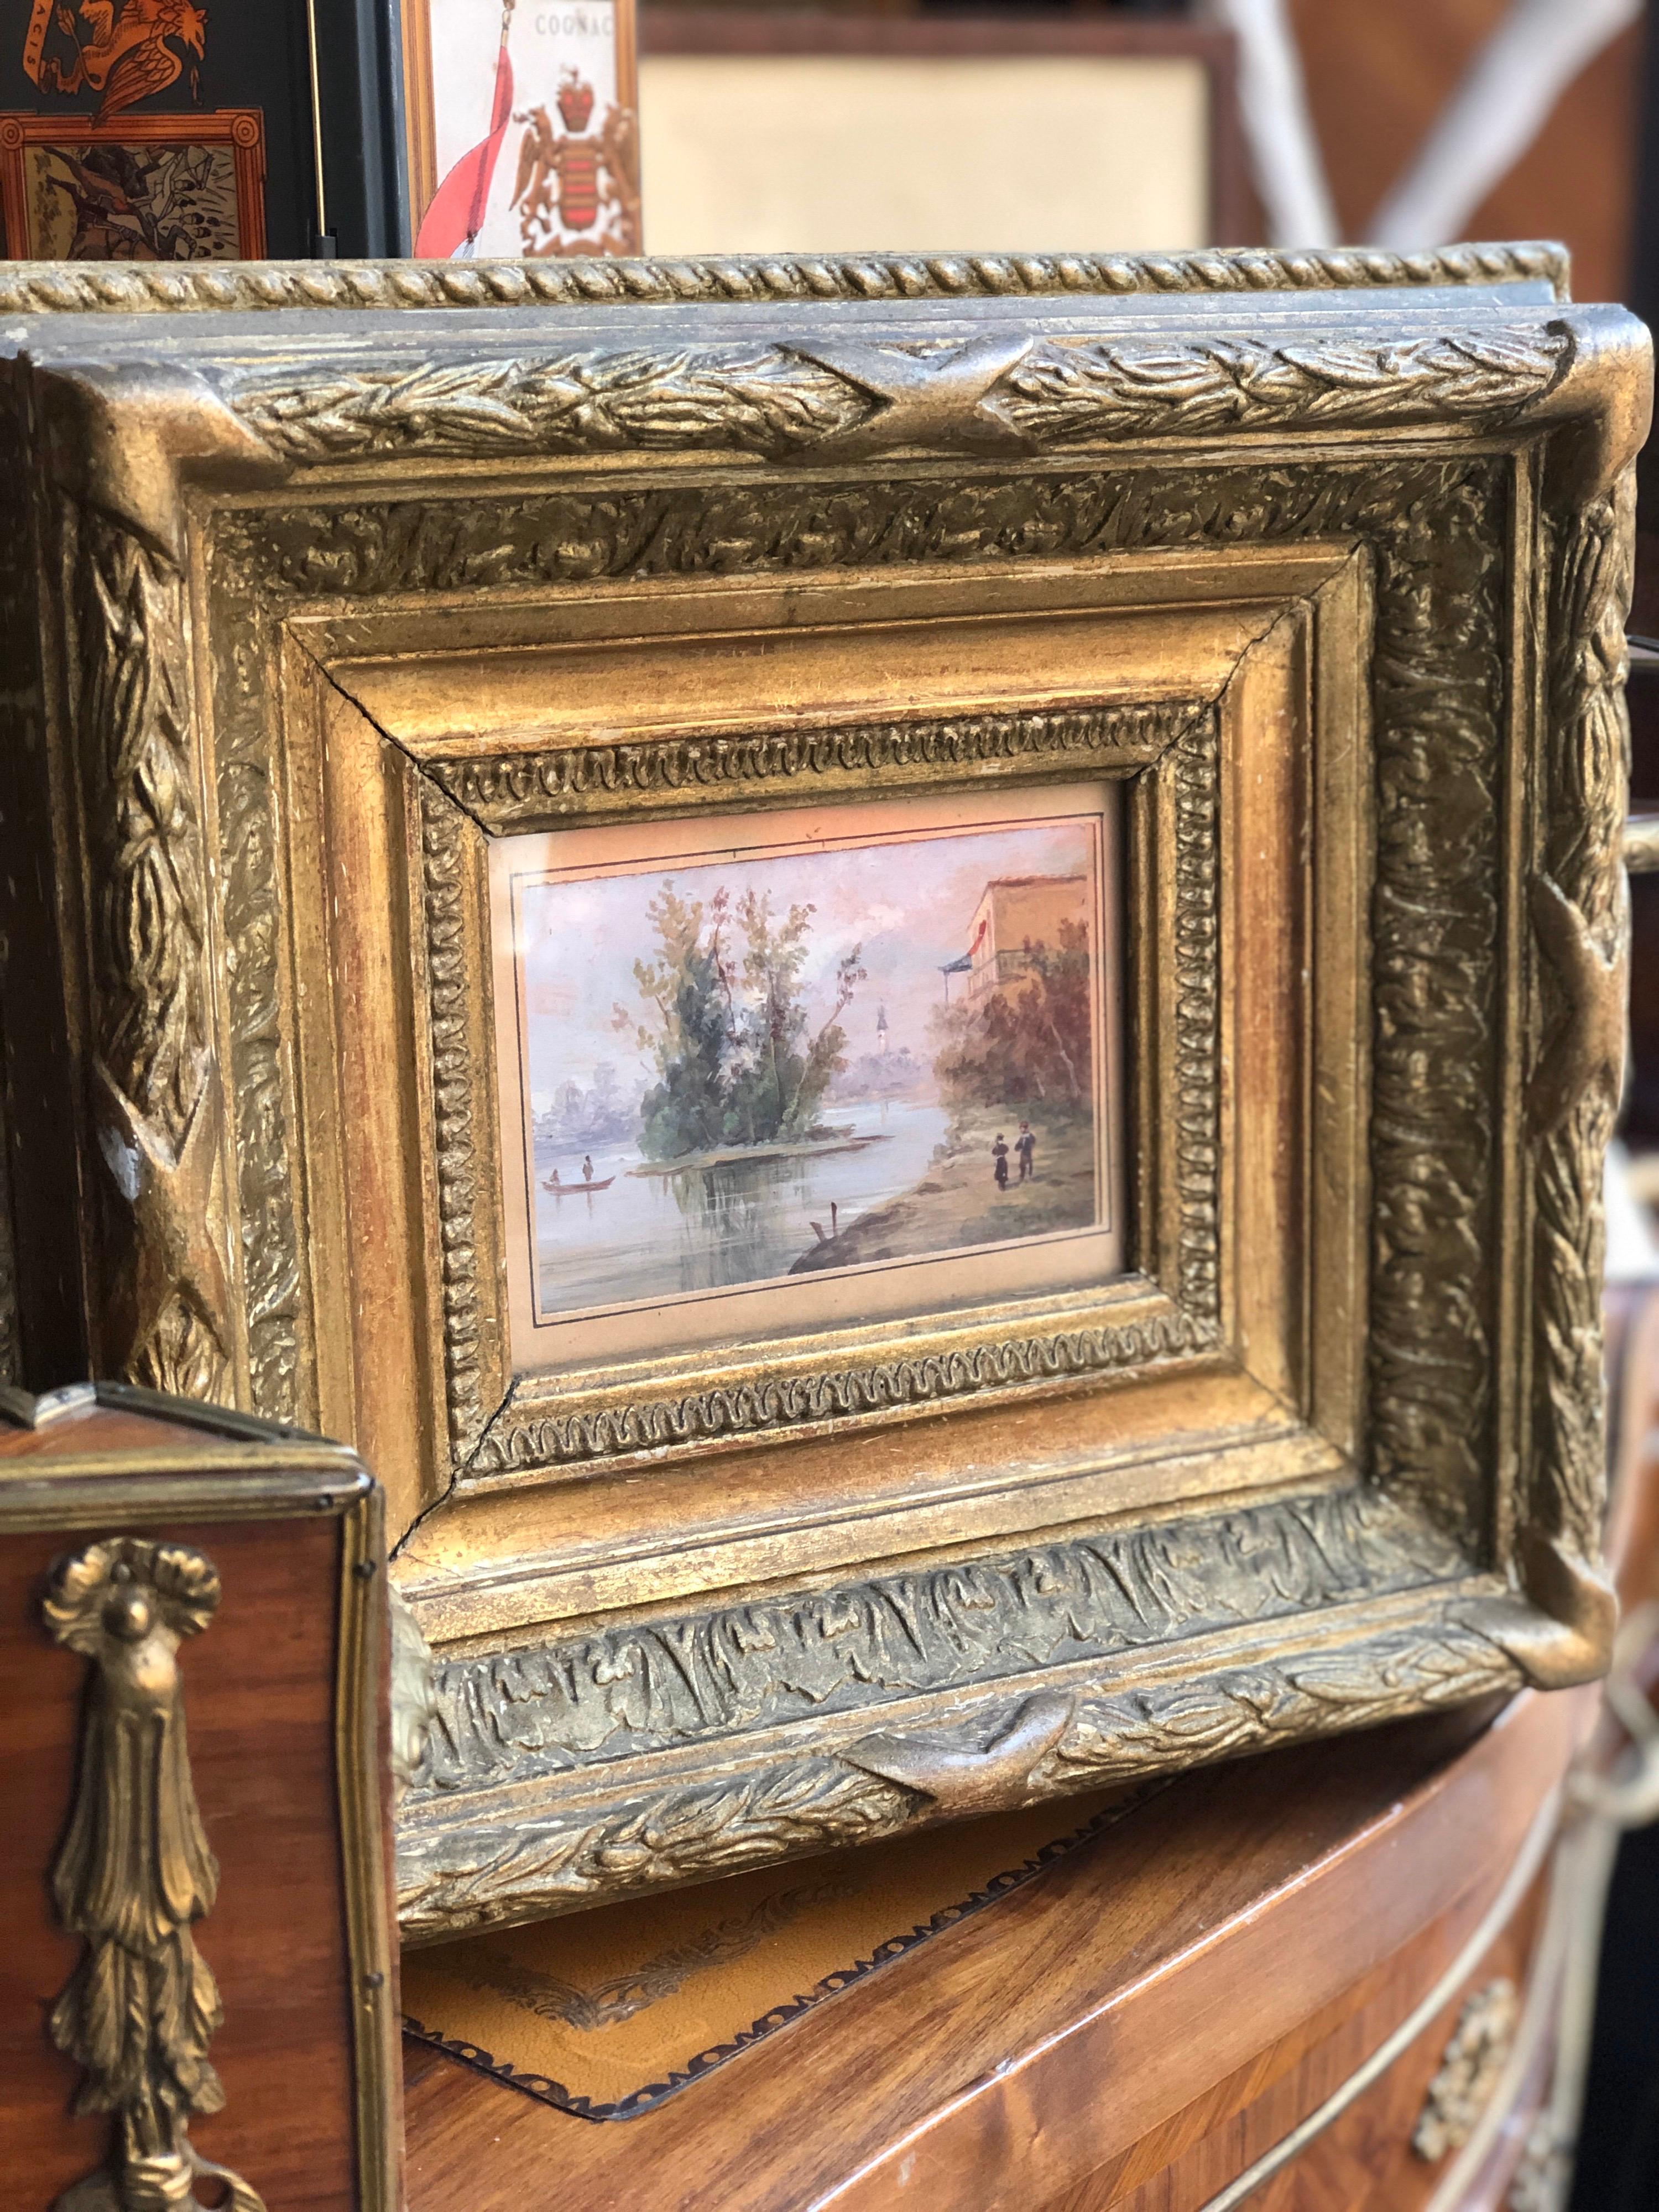 Small painting dated 19th century representing beautiful riverside landscape in light colors with few accents and figures that grab your attention right away! Amazing giltwood frame that matches the painting perfectly!
France, circa 1880.